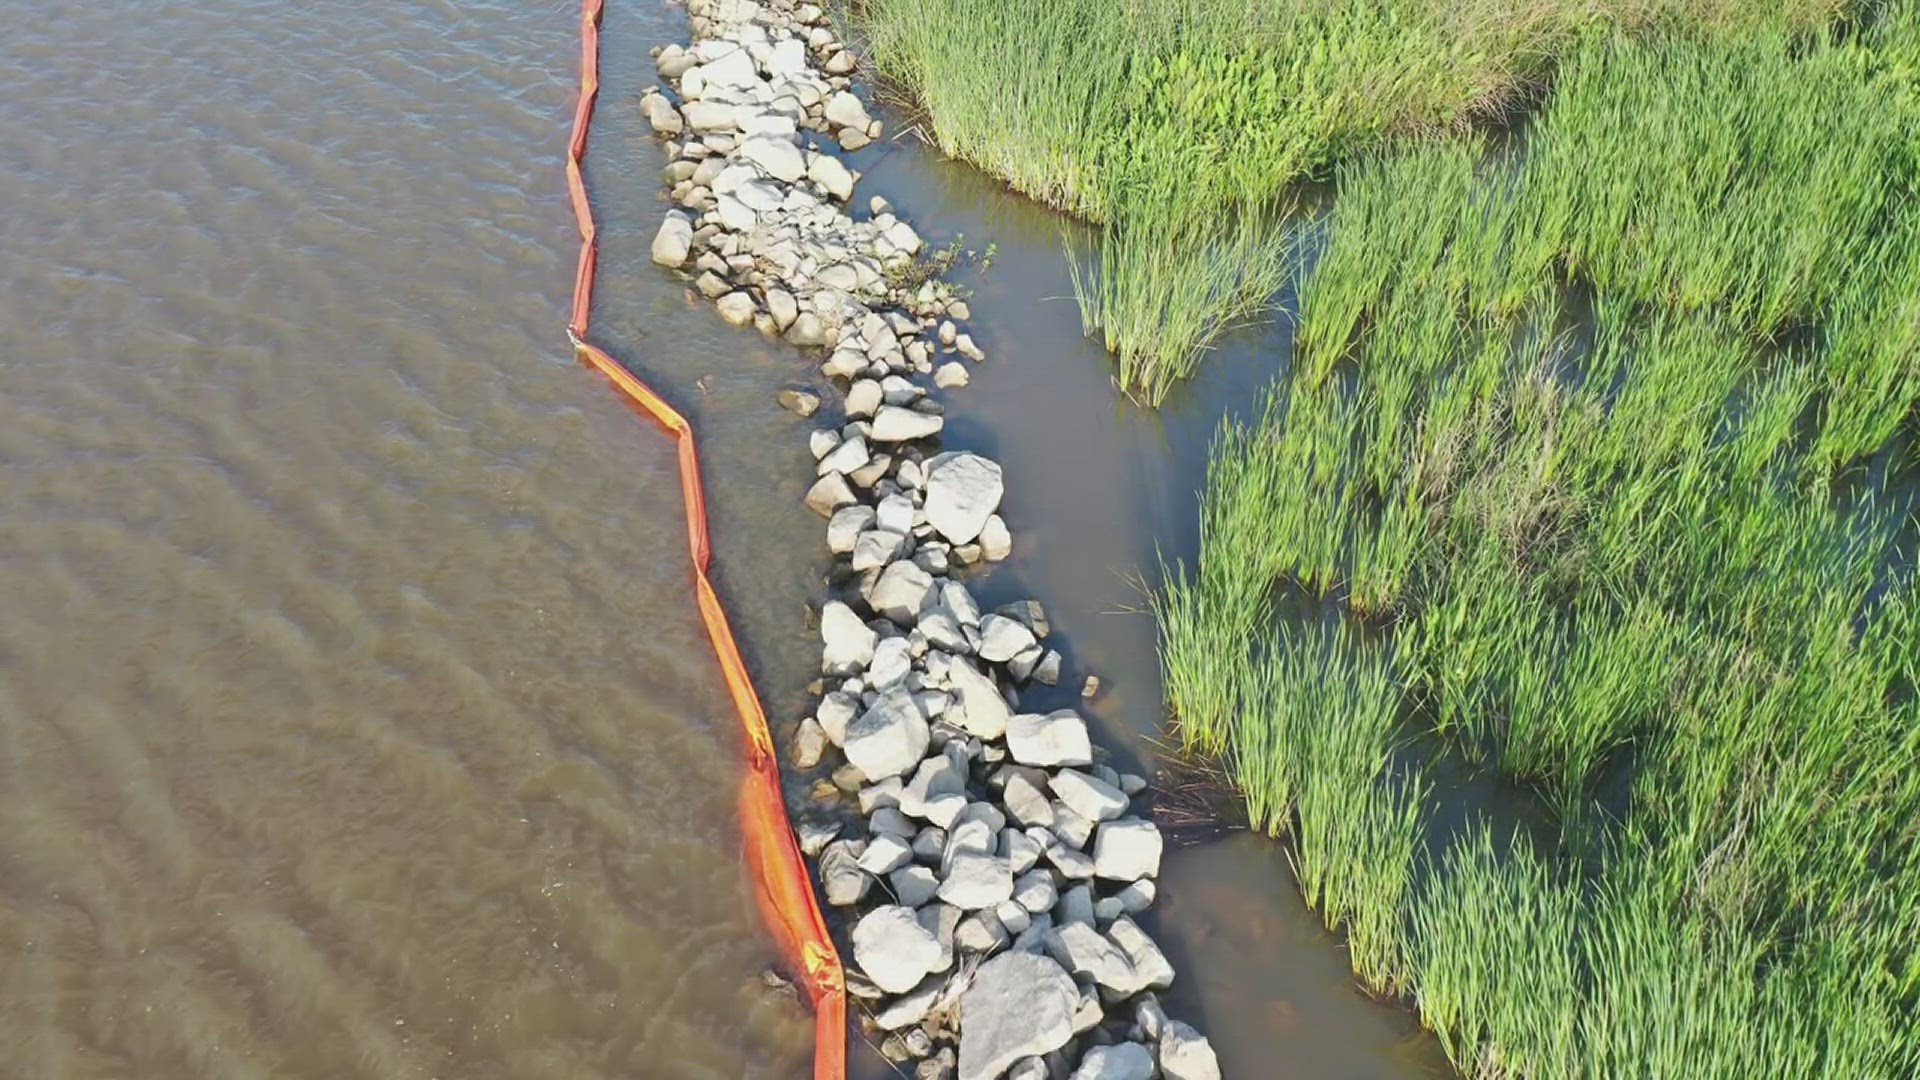 The spill happened on April 26, 2023. As of Tuesday afternoon, crews have recovered 798 gallons of oil.